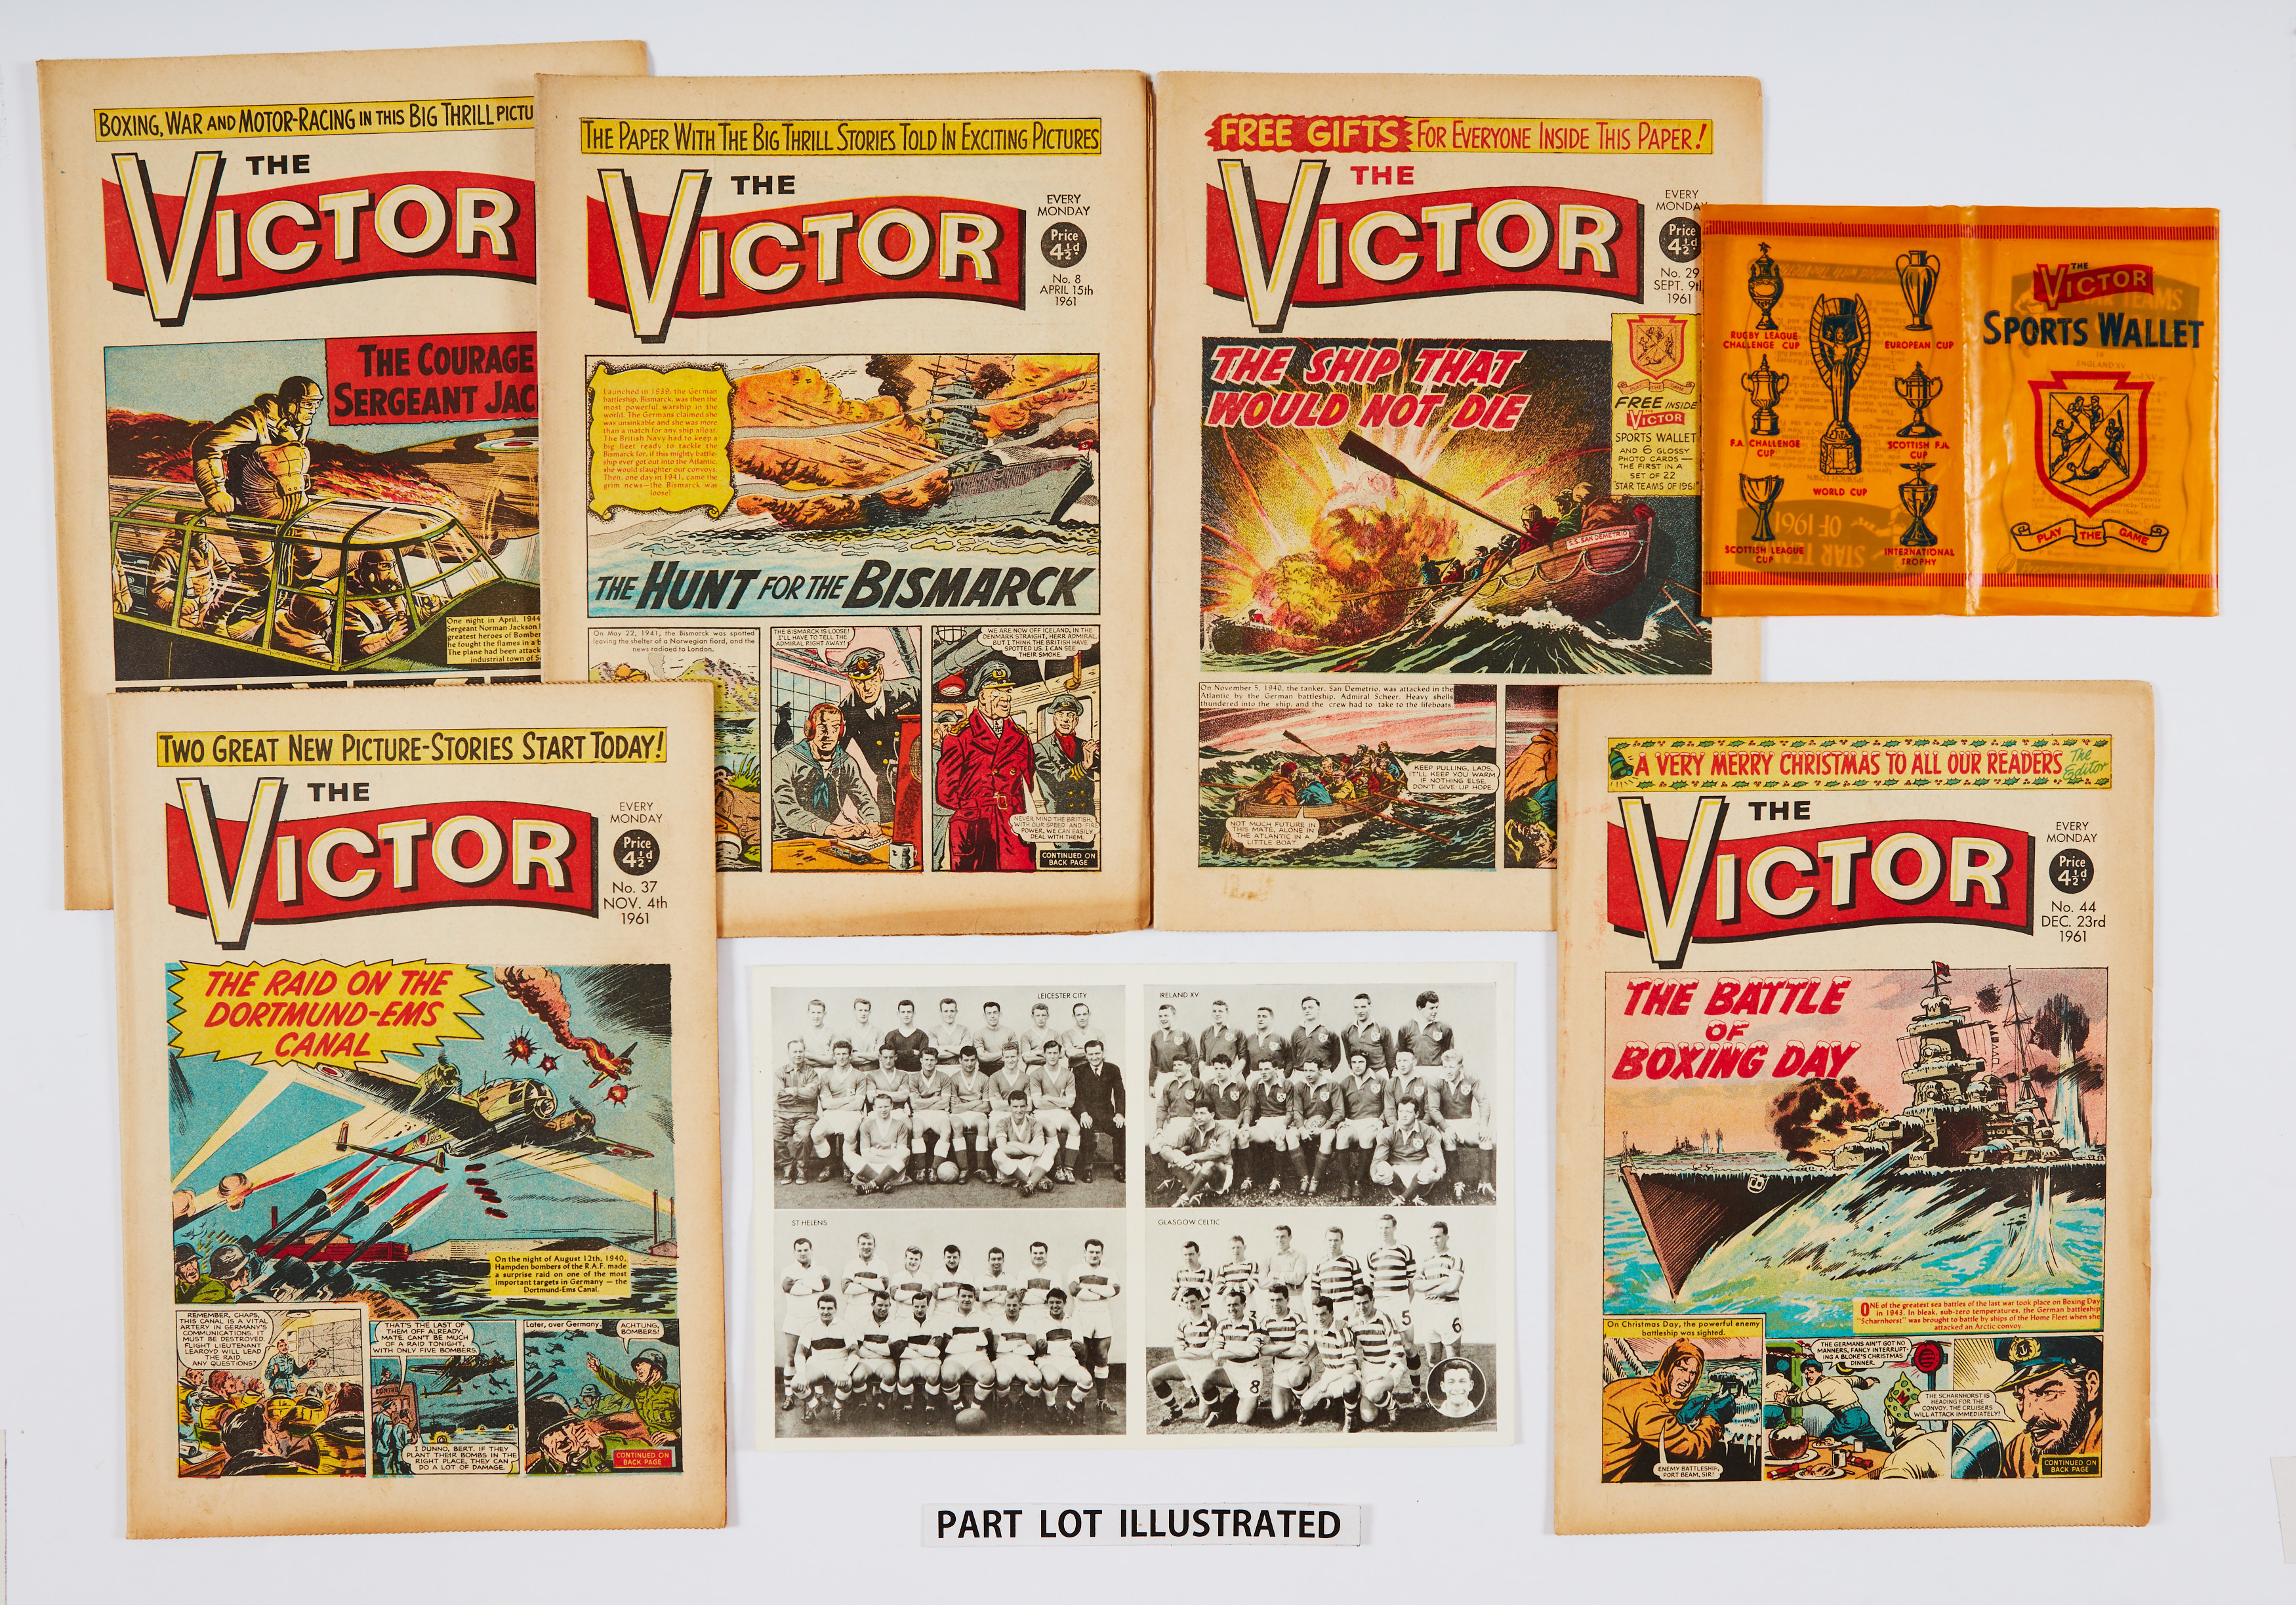 Victor (March-Dec 1961) 2-45 with all free gifts in Nos 2-5: Sportsman's Wallet and 12 Football Club - Image 2 of 2